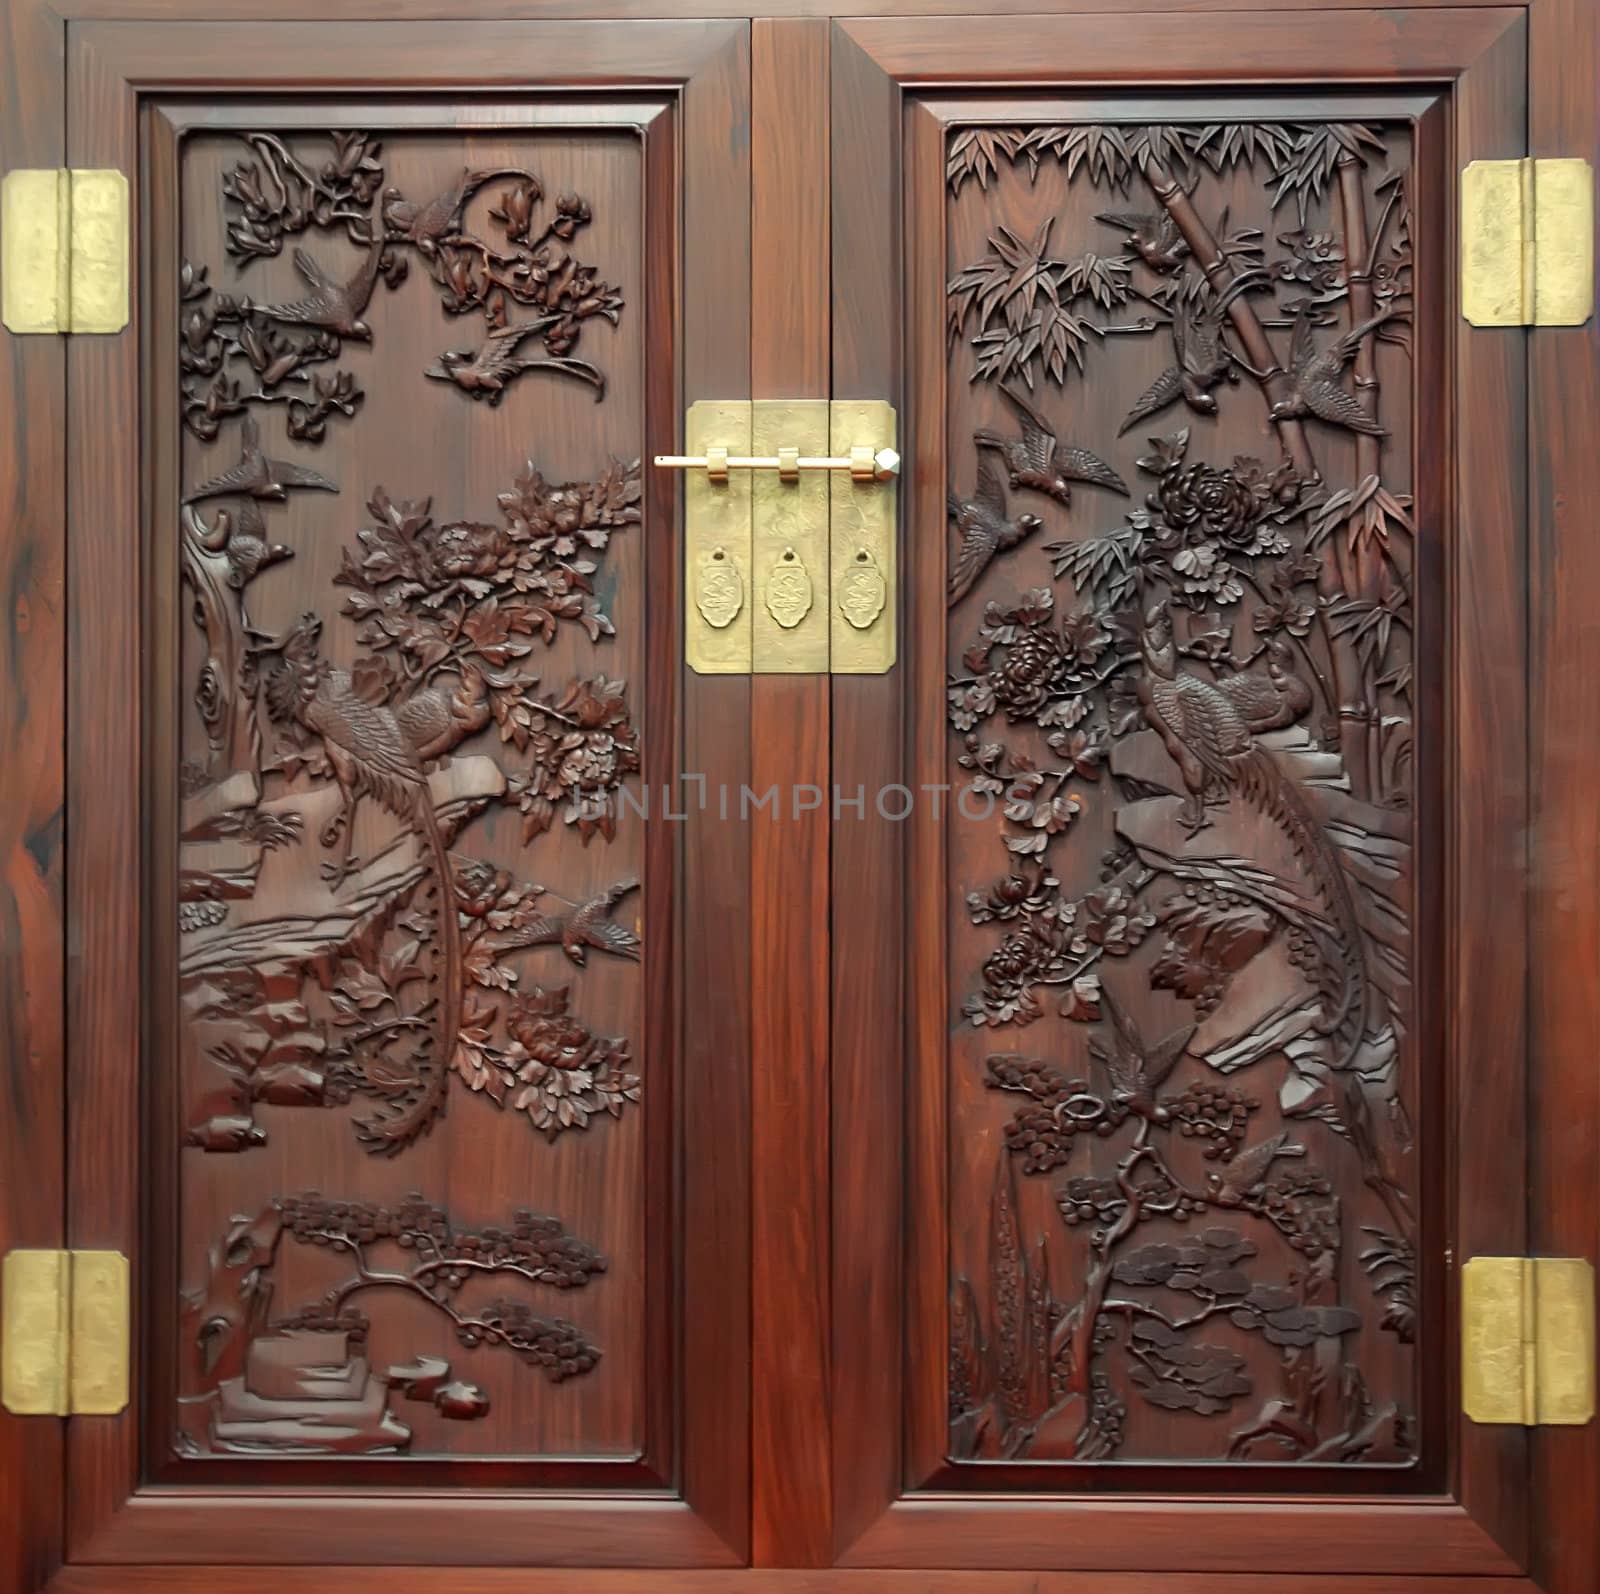 The wooden carvings on the China's ancient furniture